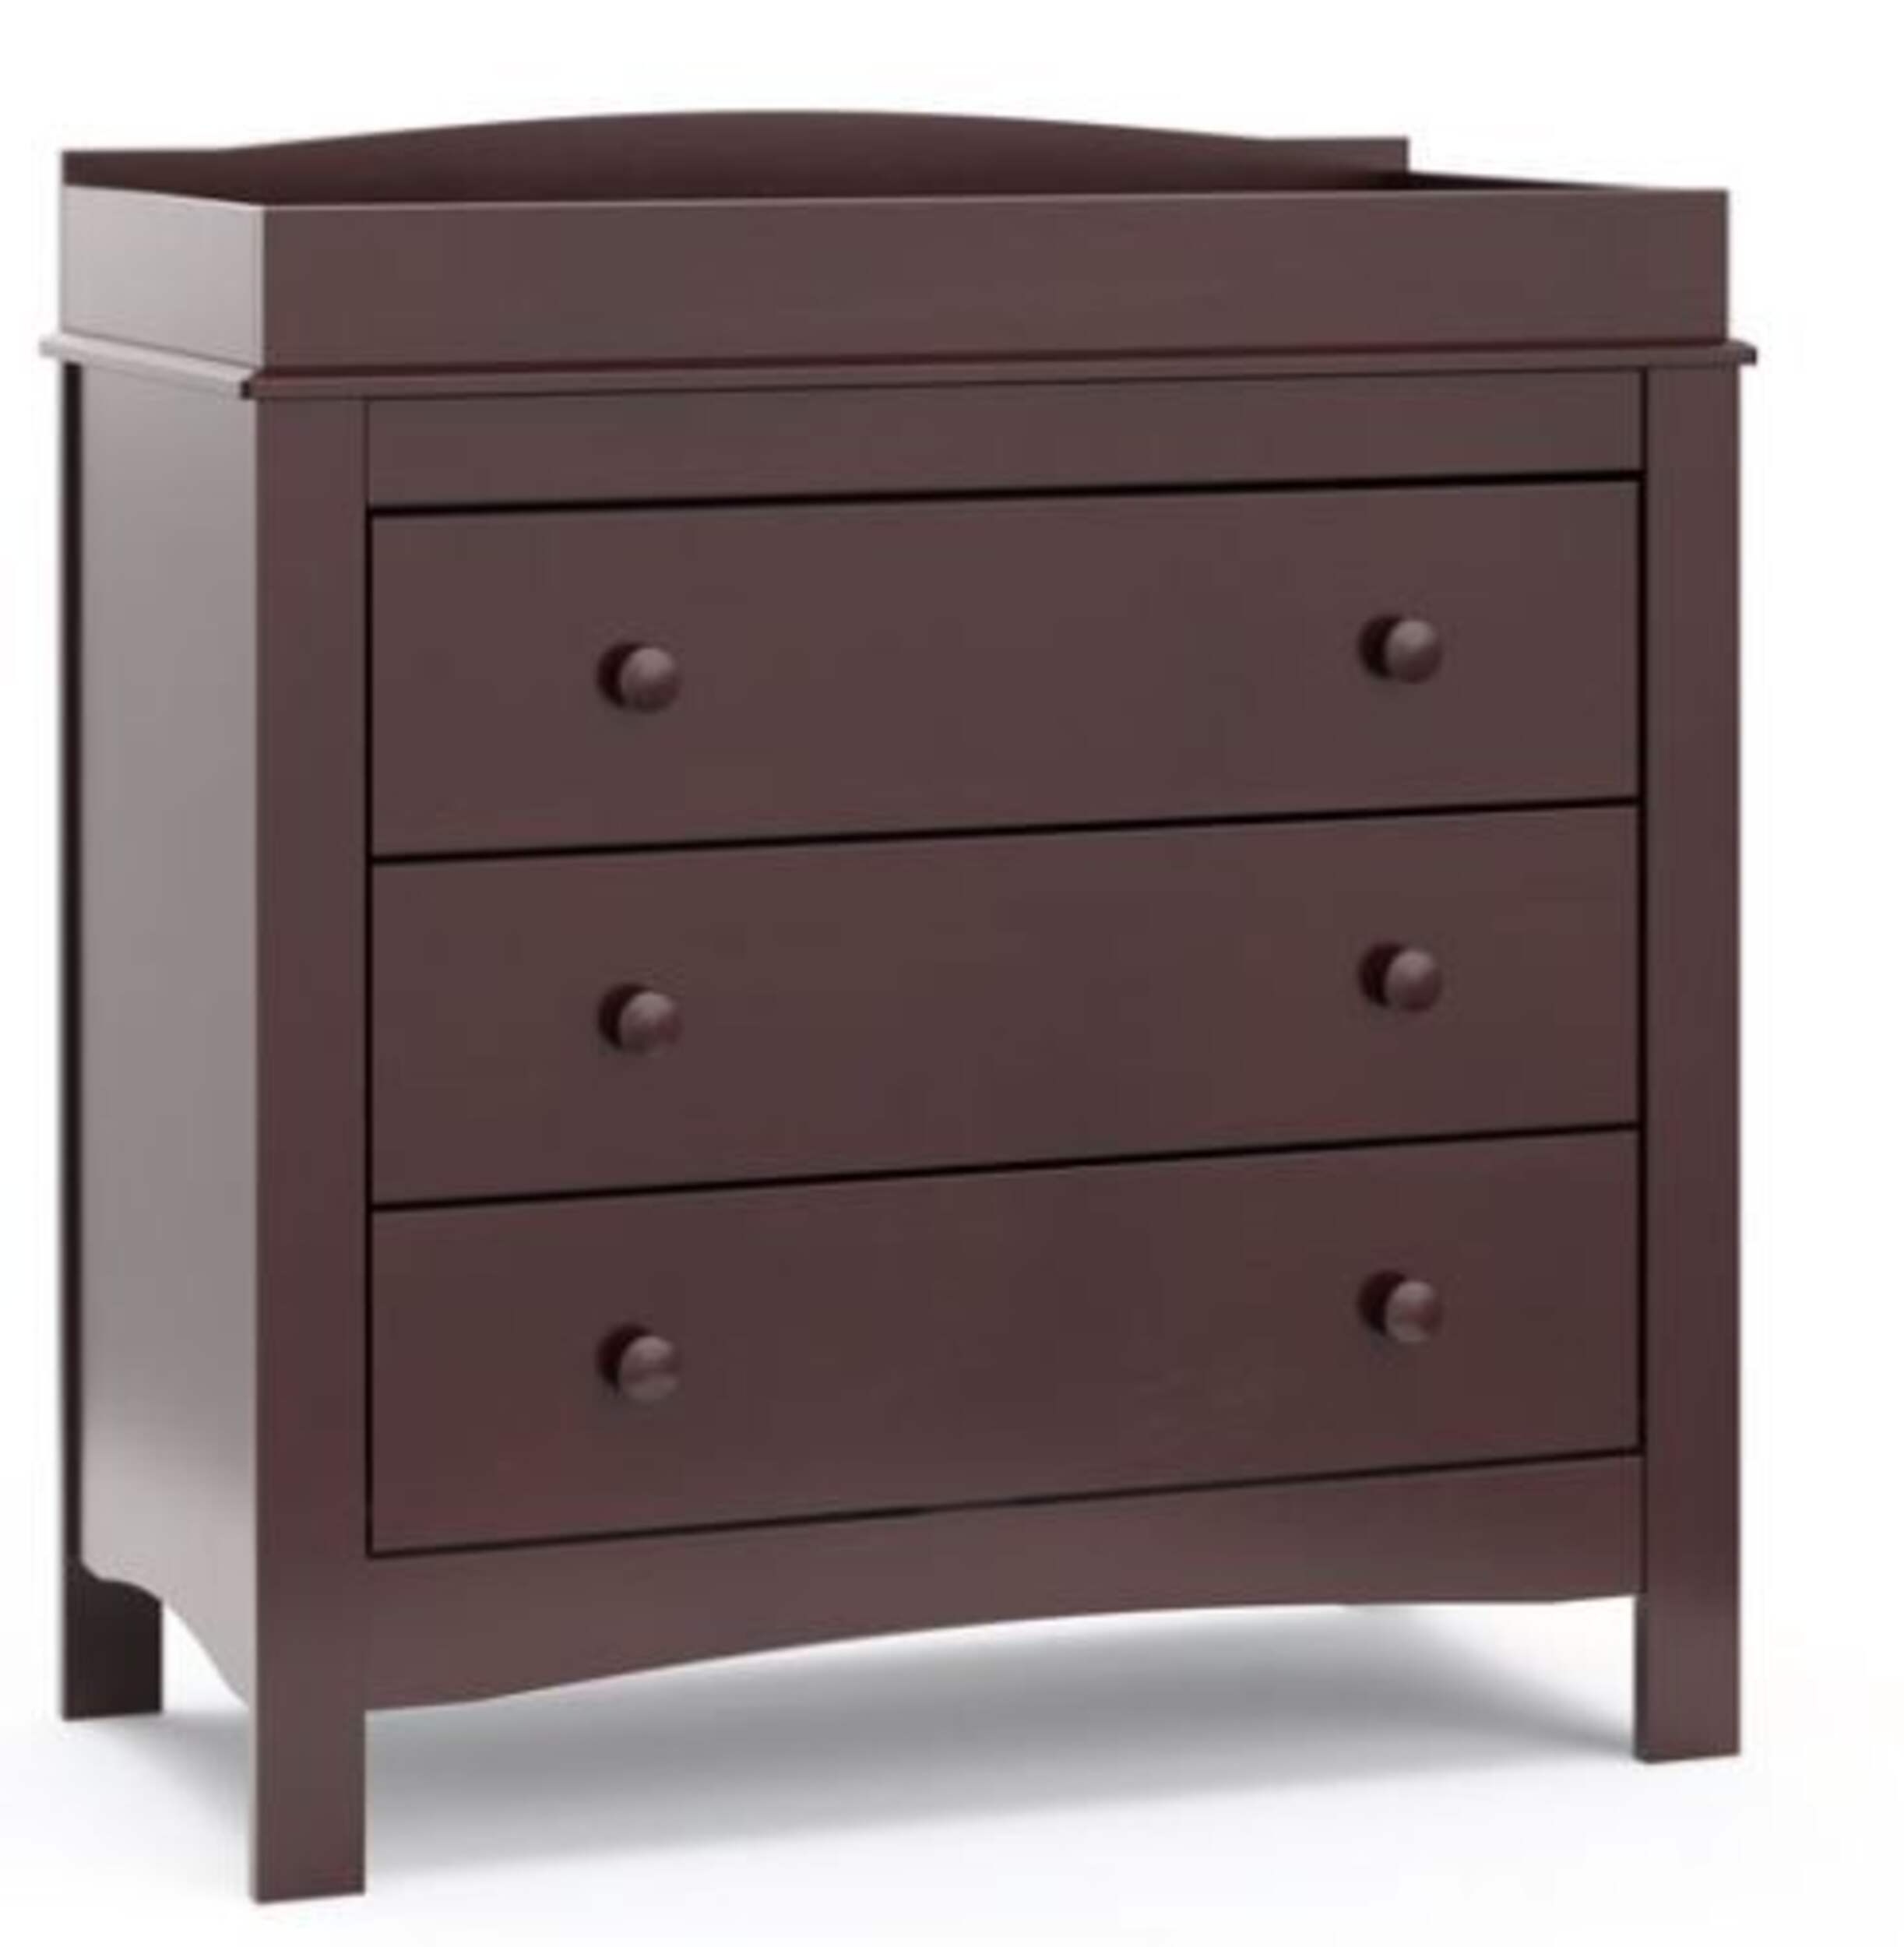 Graco Noah 3 Drawer Dresser with Changing Topper, Espresso Canadian Tire